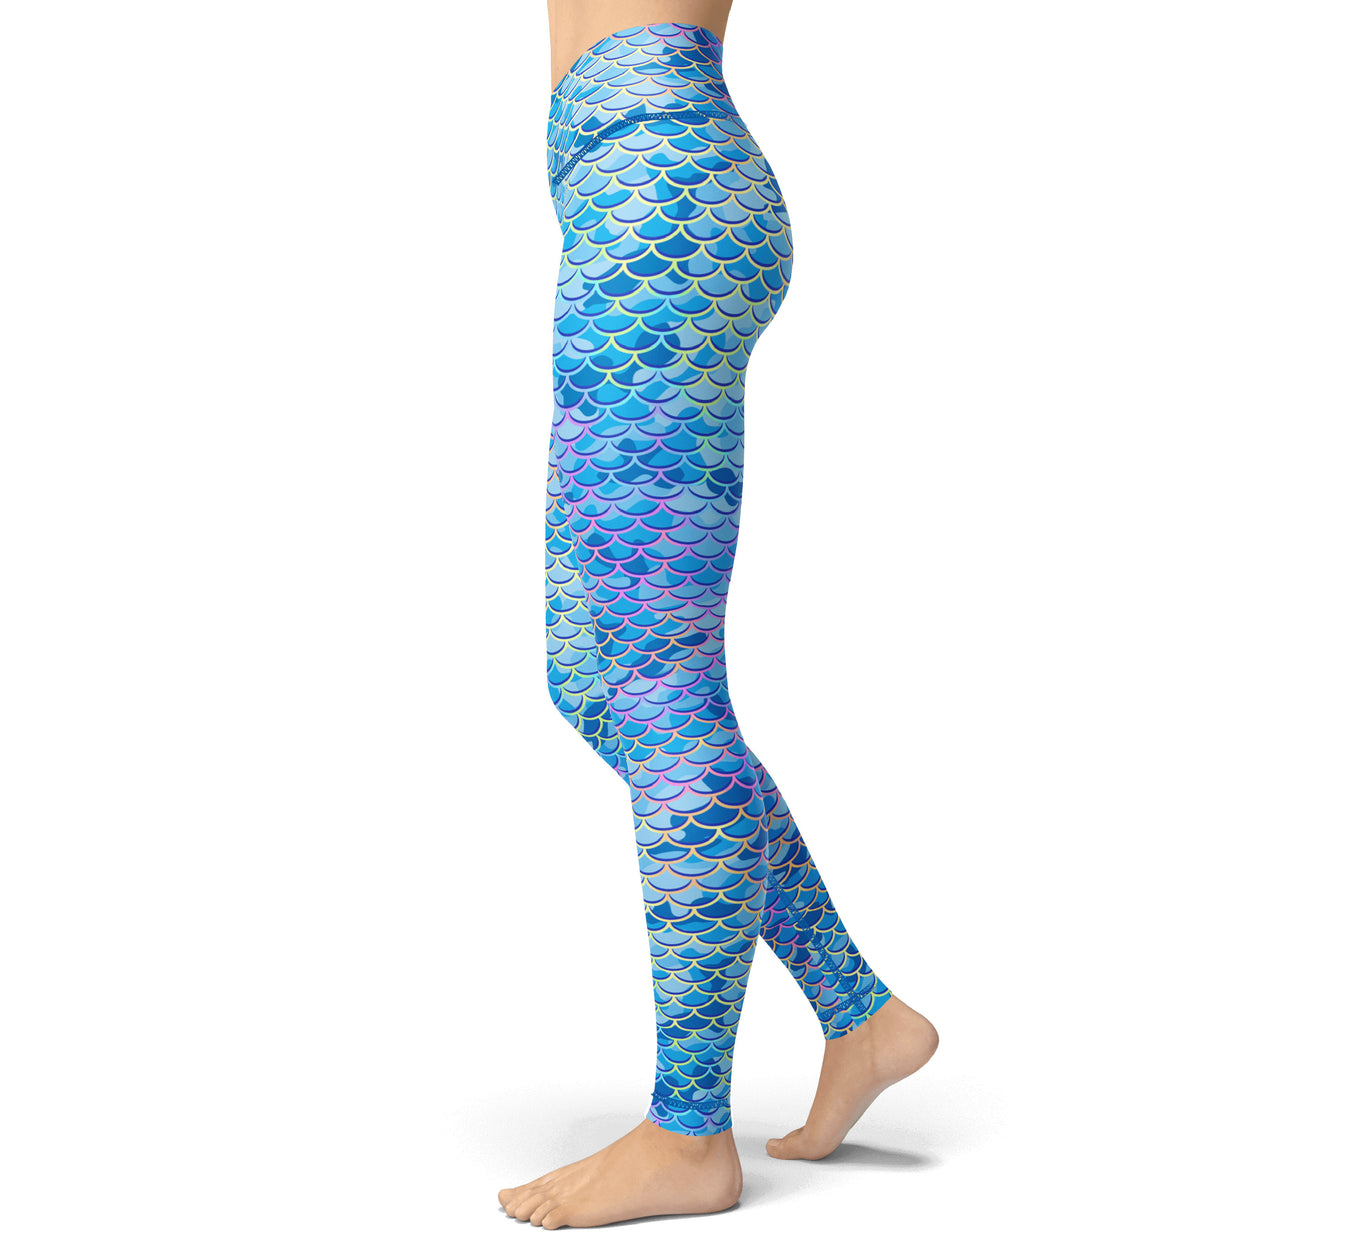 Spacefish Army - Unique Dive Leggings & Clothing for Mermaids